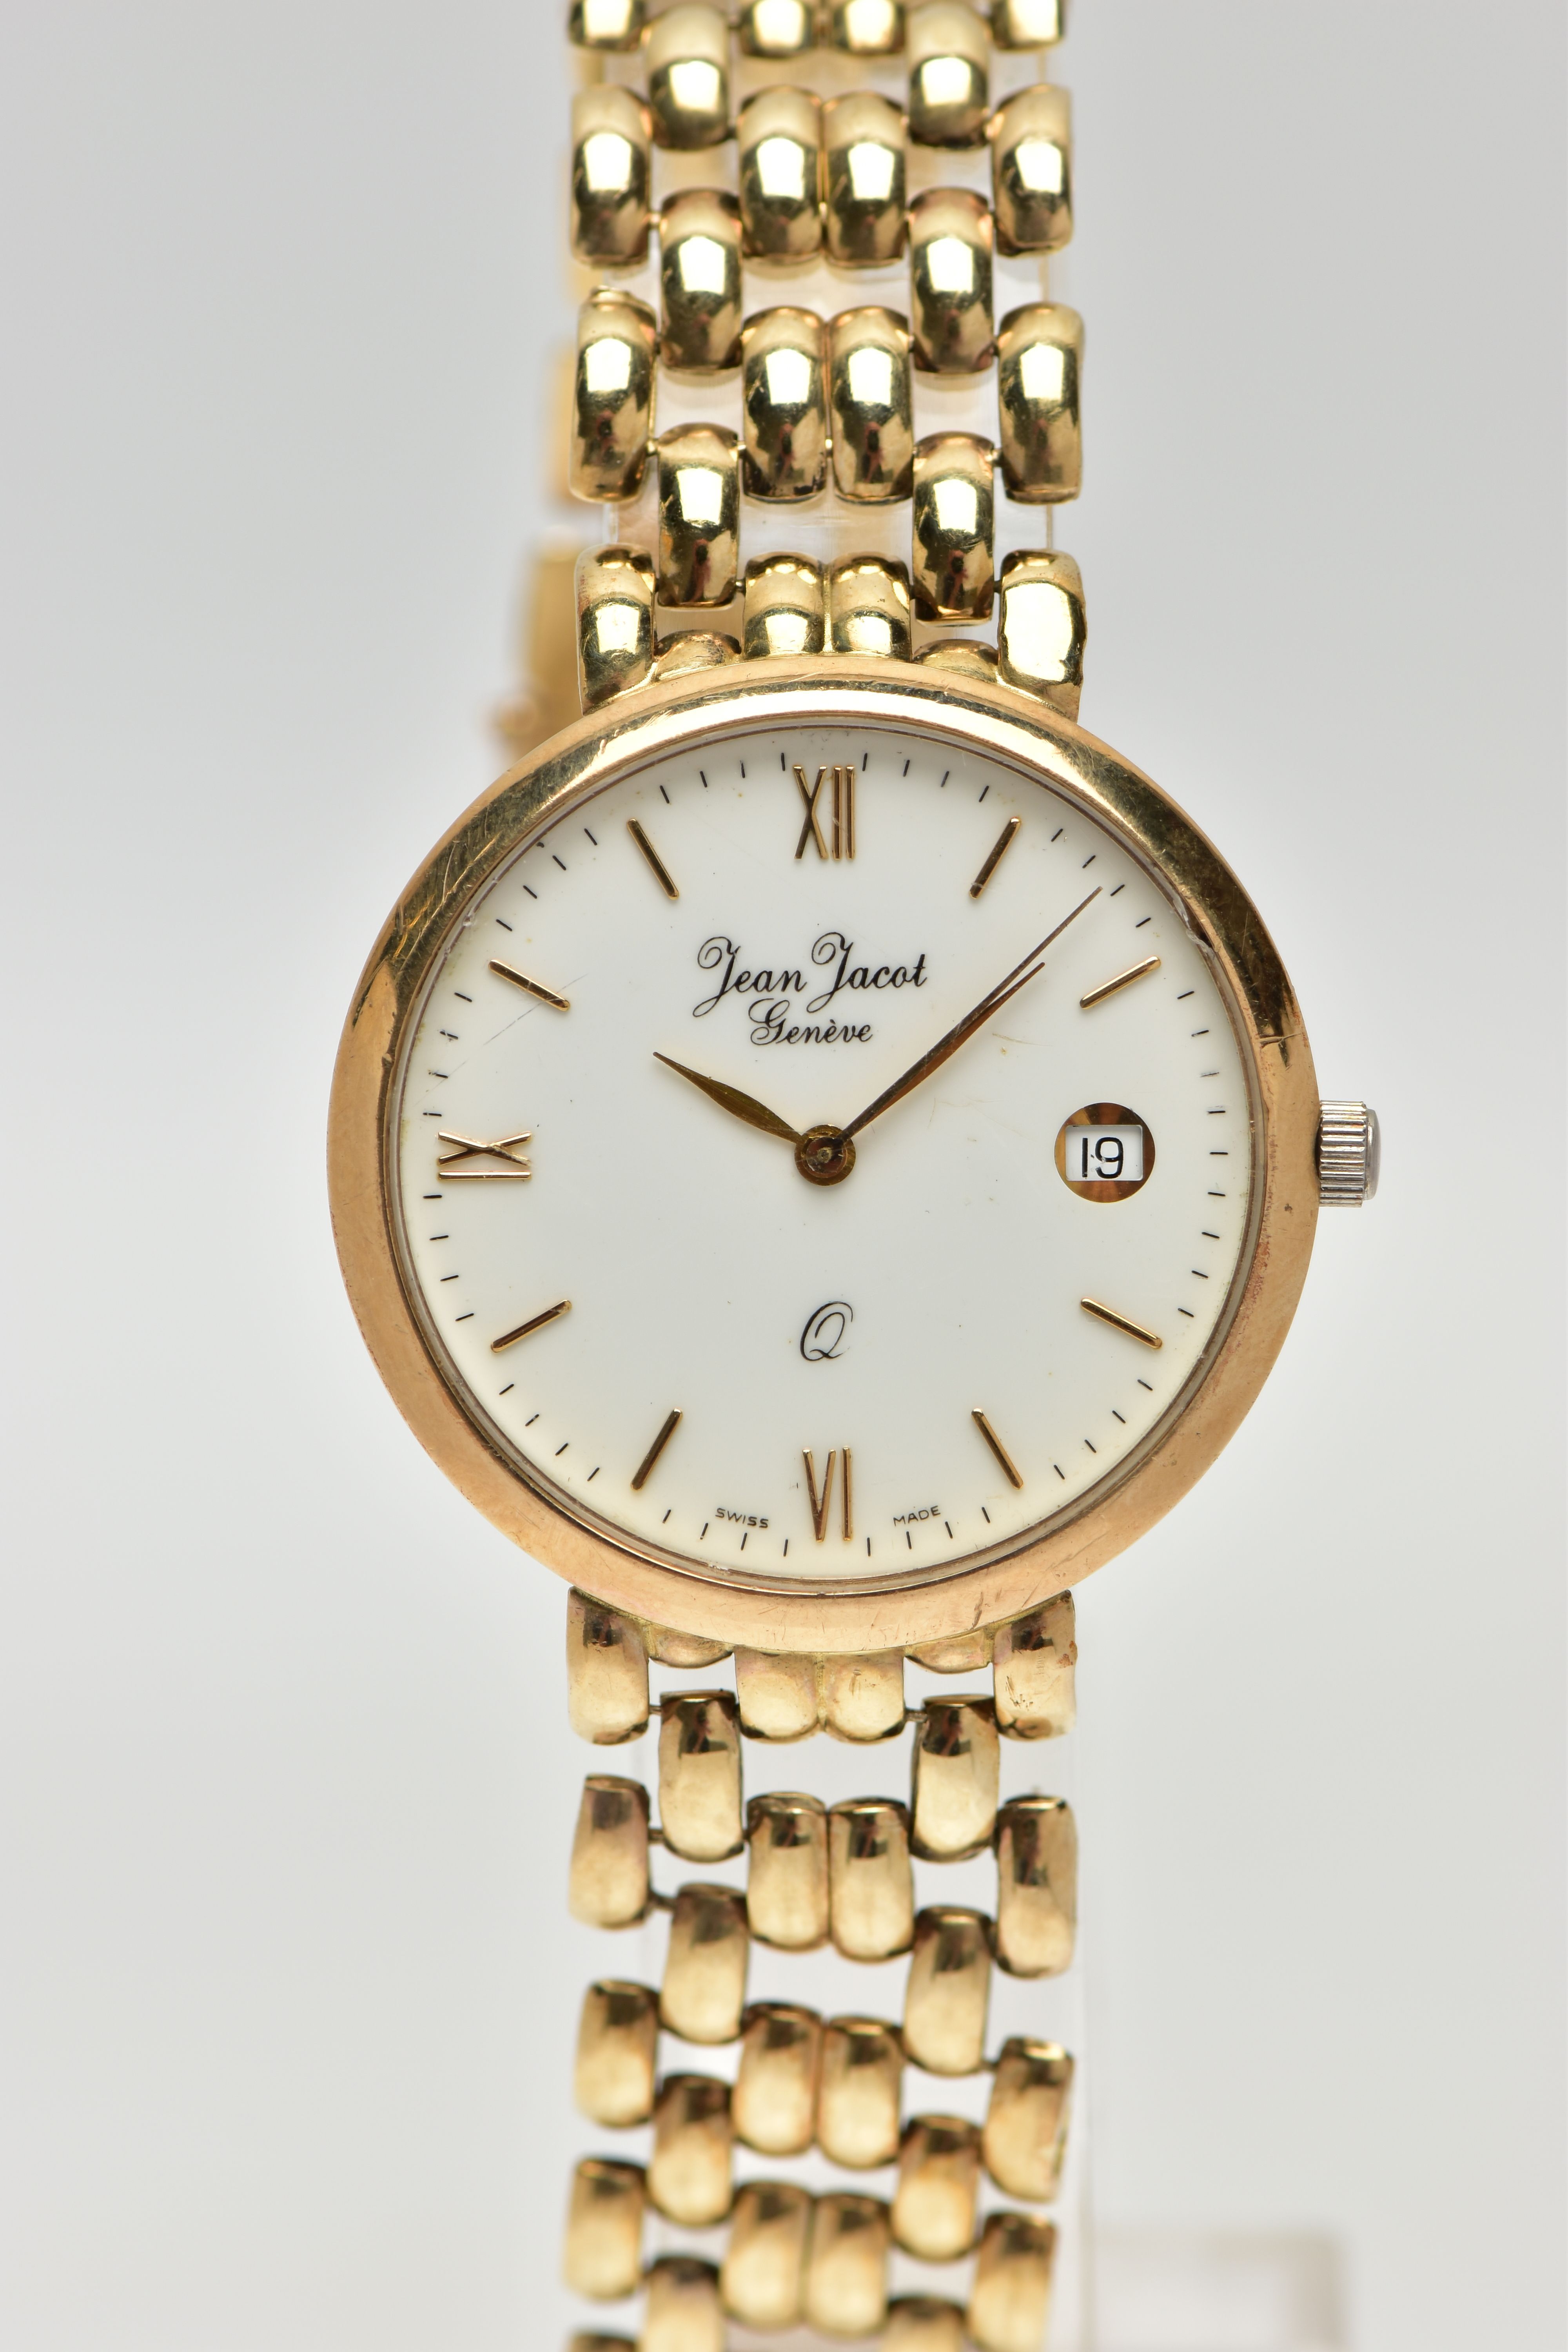 A JEAN JACOT GENEVE YELLOW METAL QUARTZ WRISTWATCH, the white dial with gold tone hourly applied